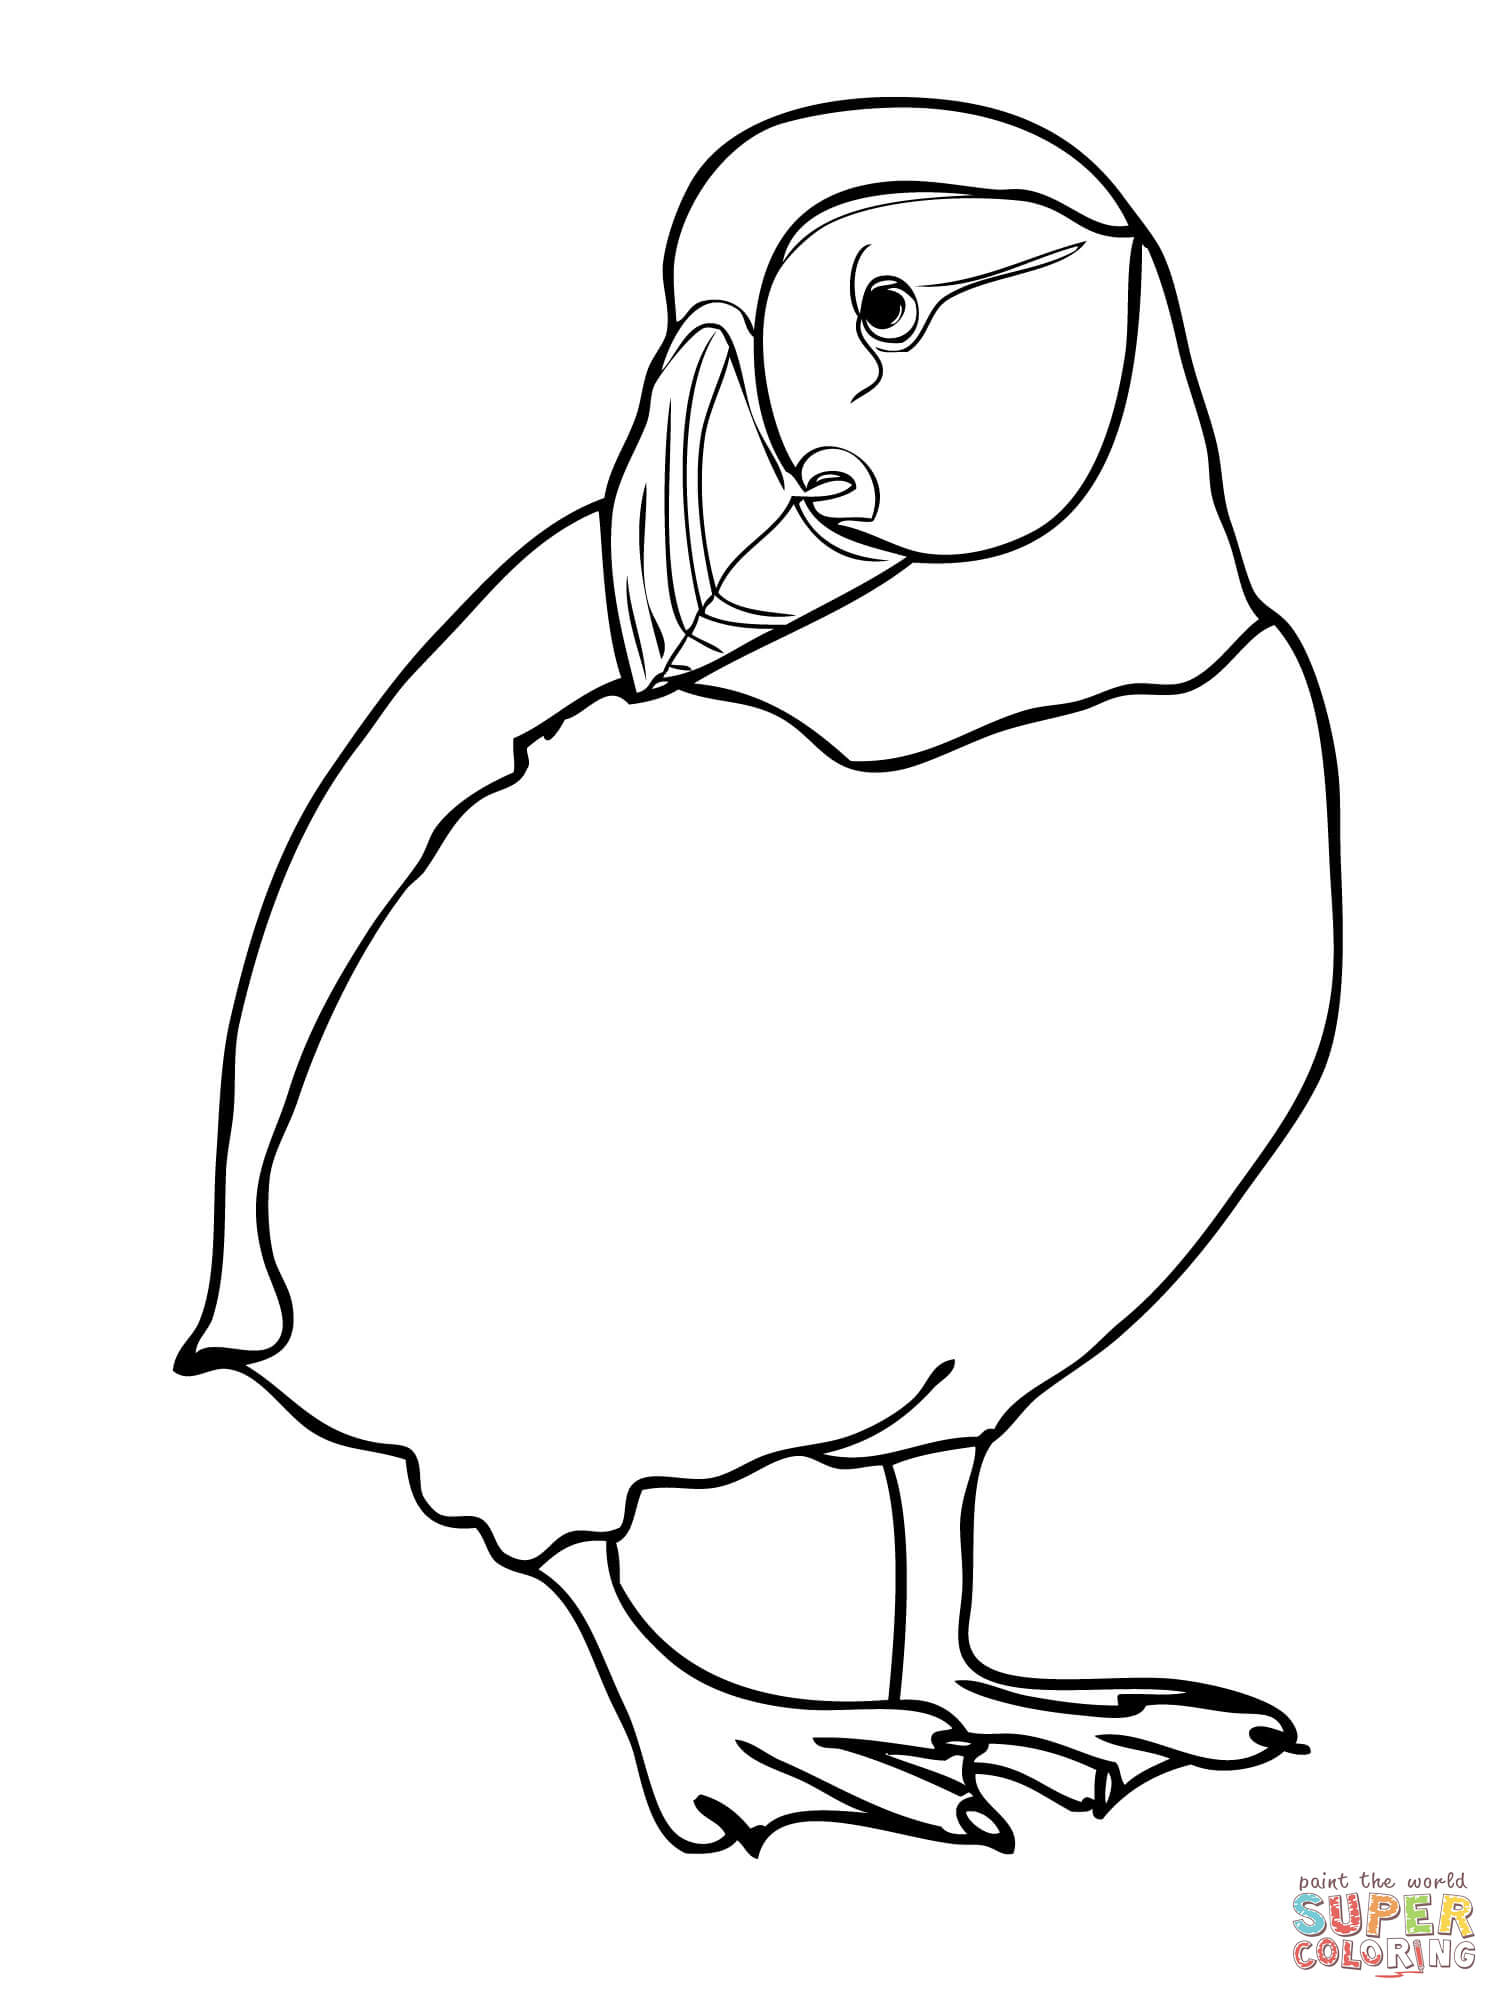 Puffin coloring #15, Download drawings